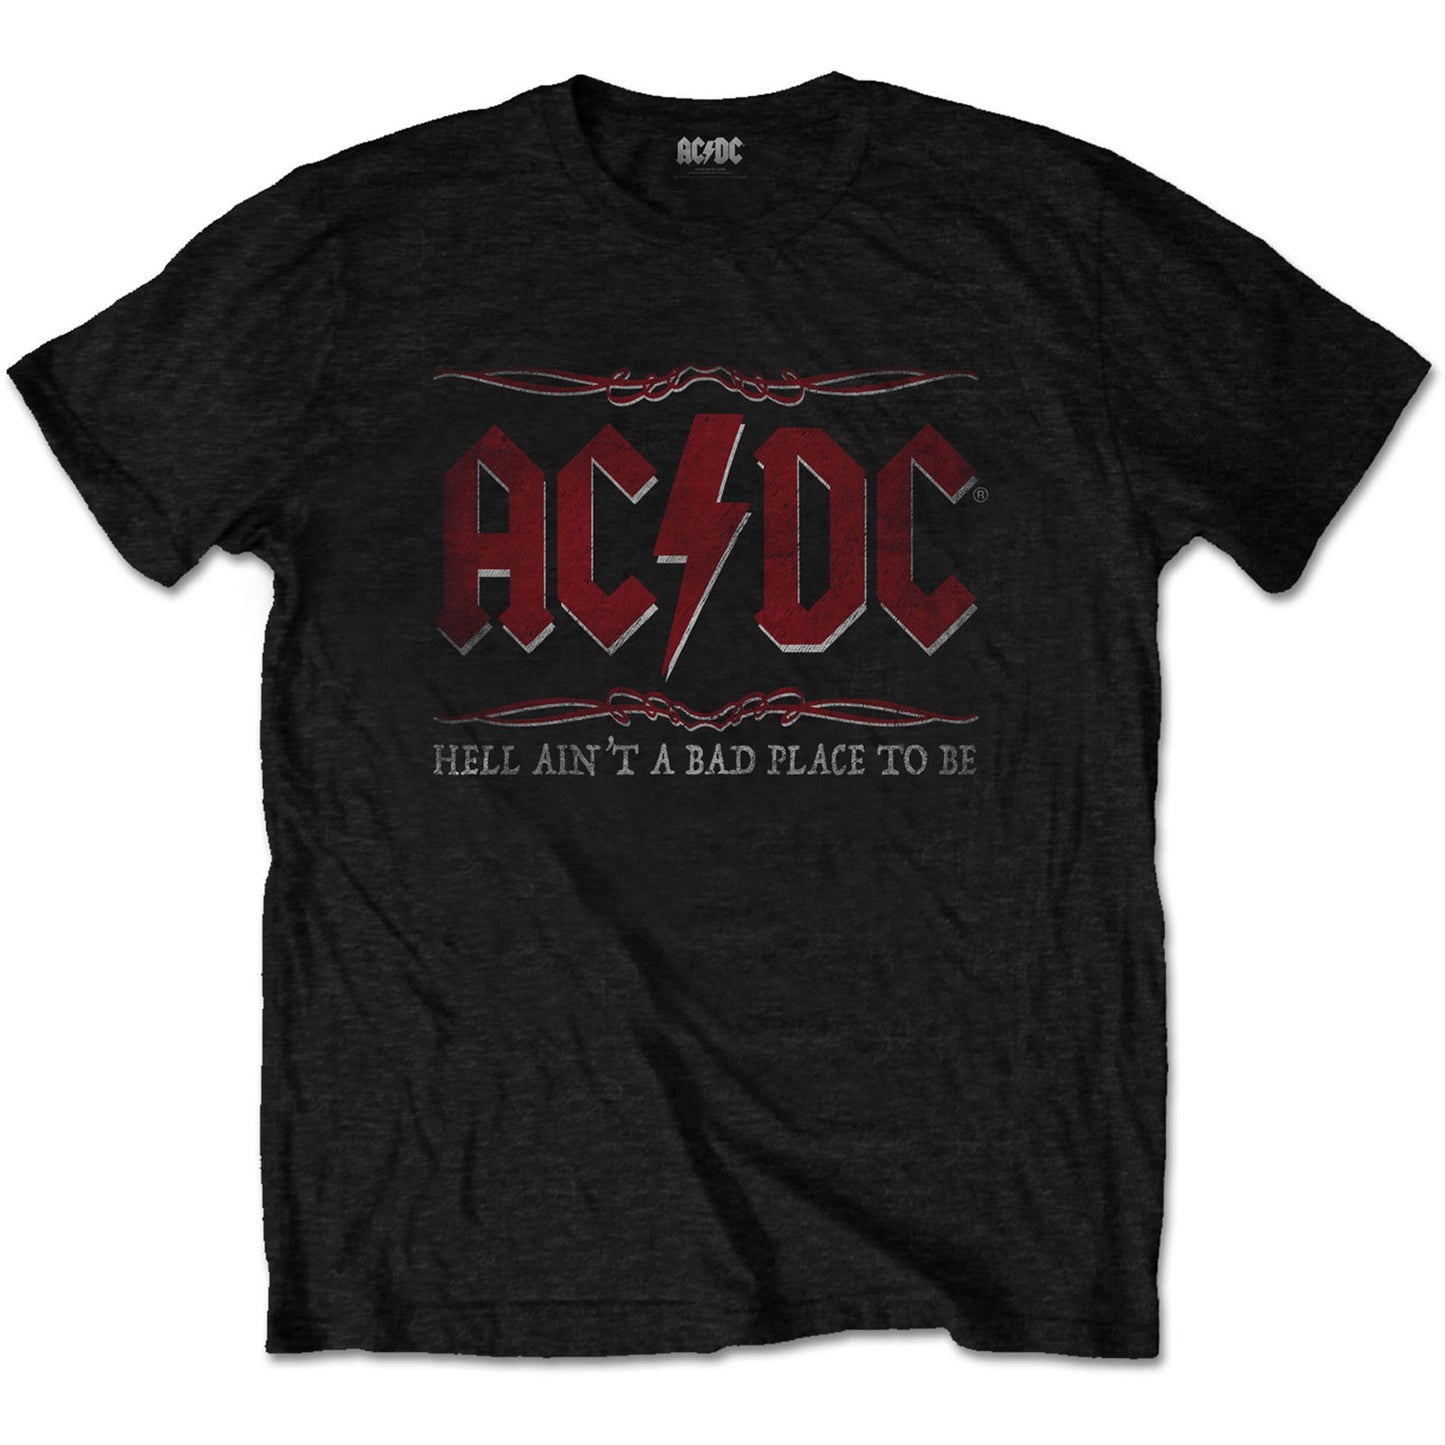 AC/DC UNISEX T-SHIRT: HELL AIN'T A BAD PLACE